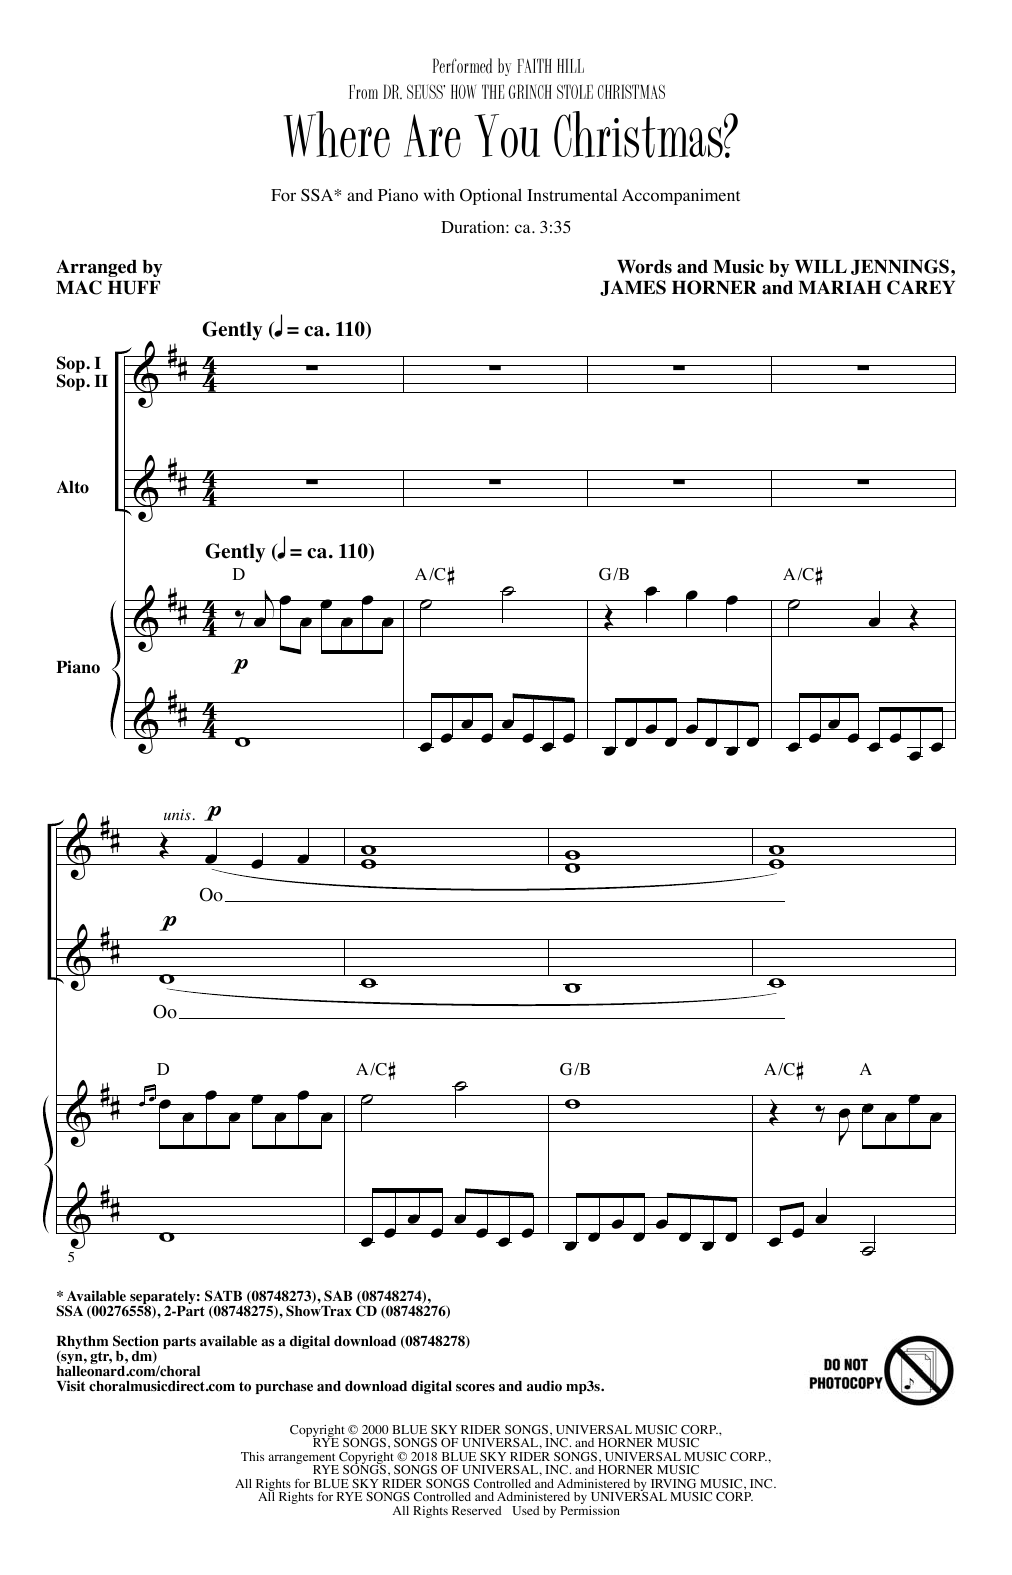 Download Faith Hill Where Are You Christmas? (arr. Mac Huff Sheet Music